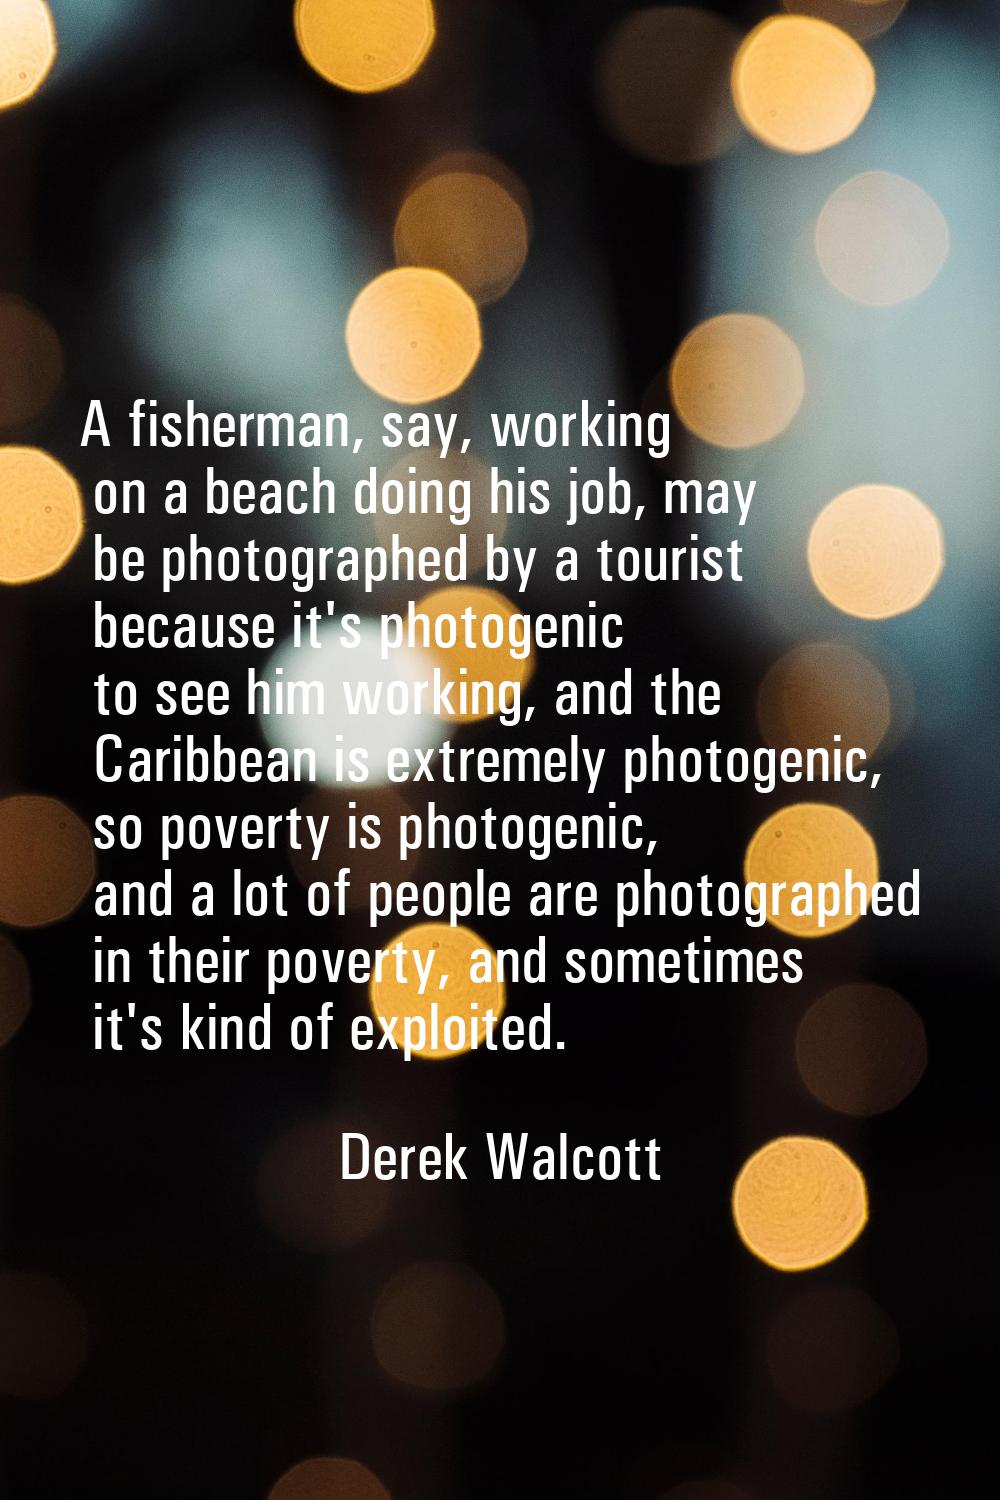 A fisherman, say, working on a beach doing his job, may be photographed by a tourist because it's p